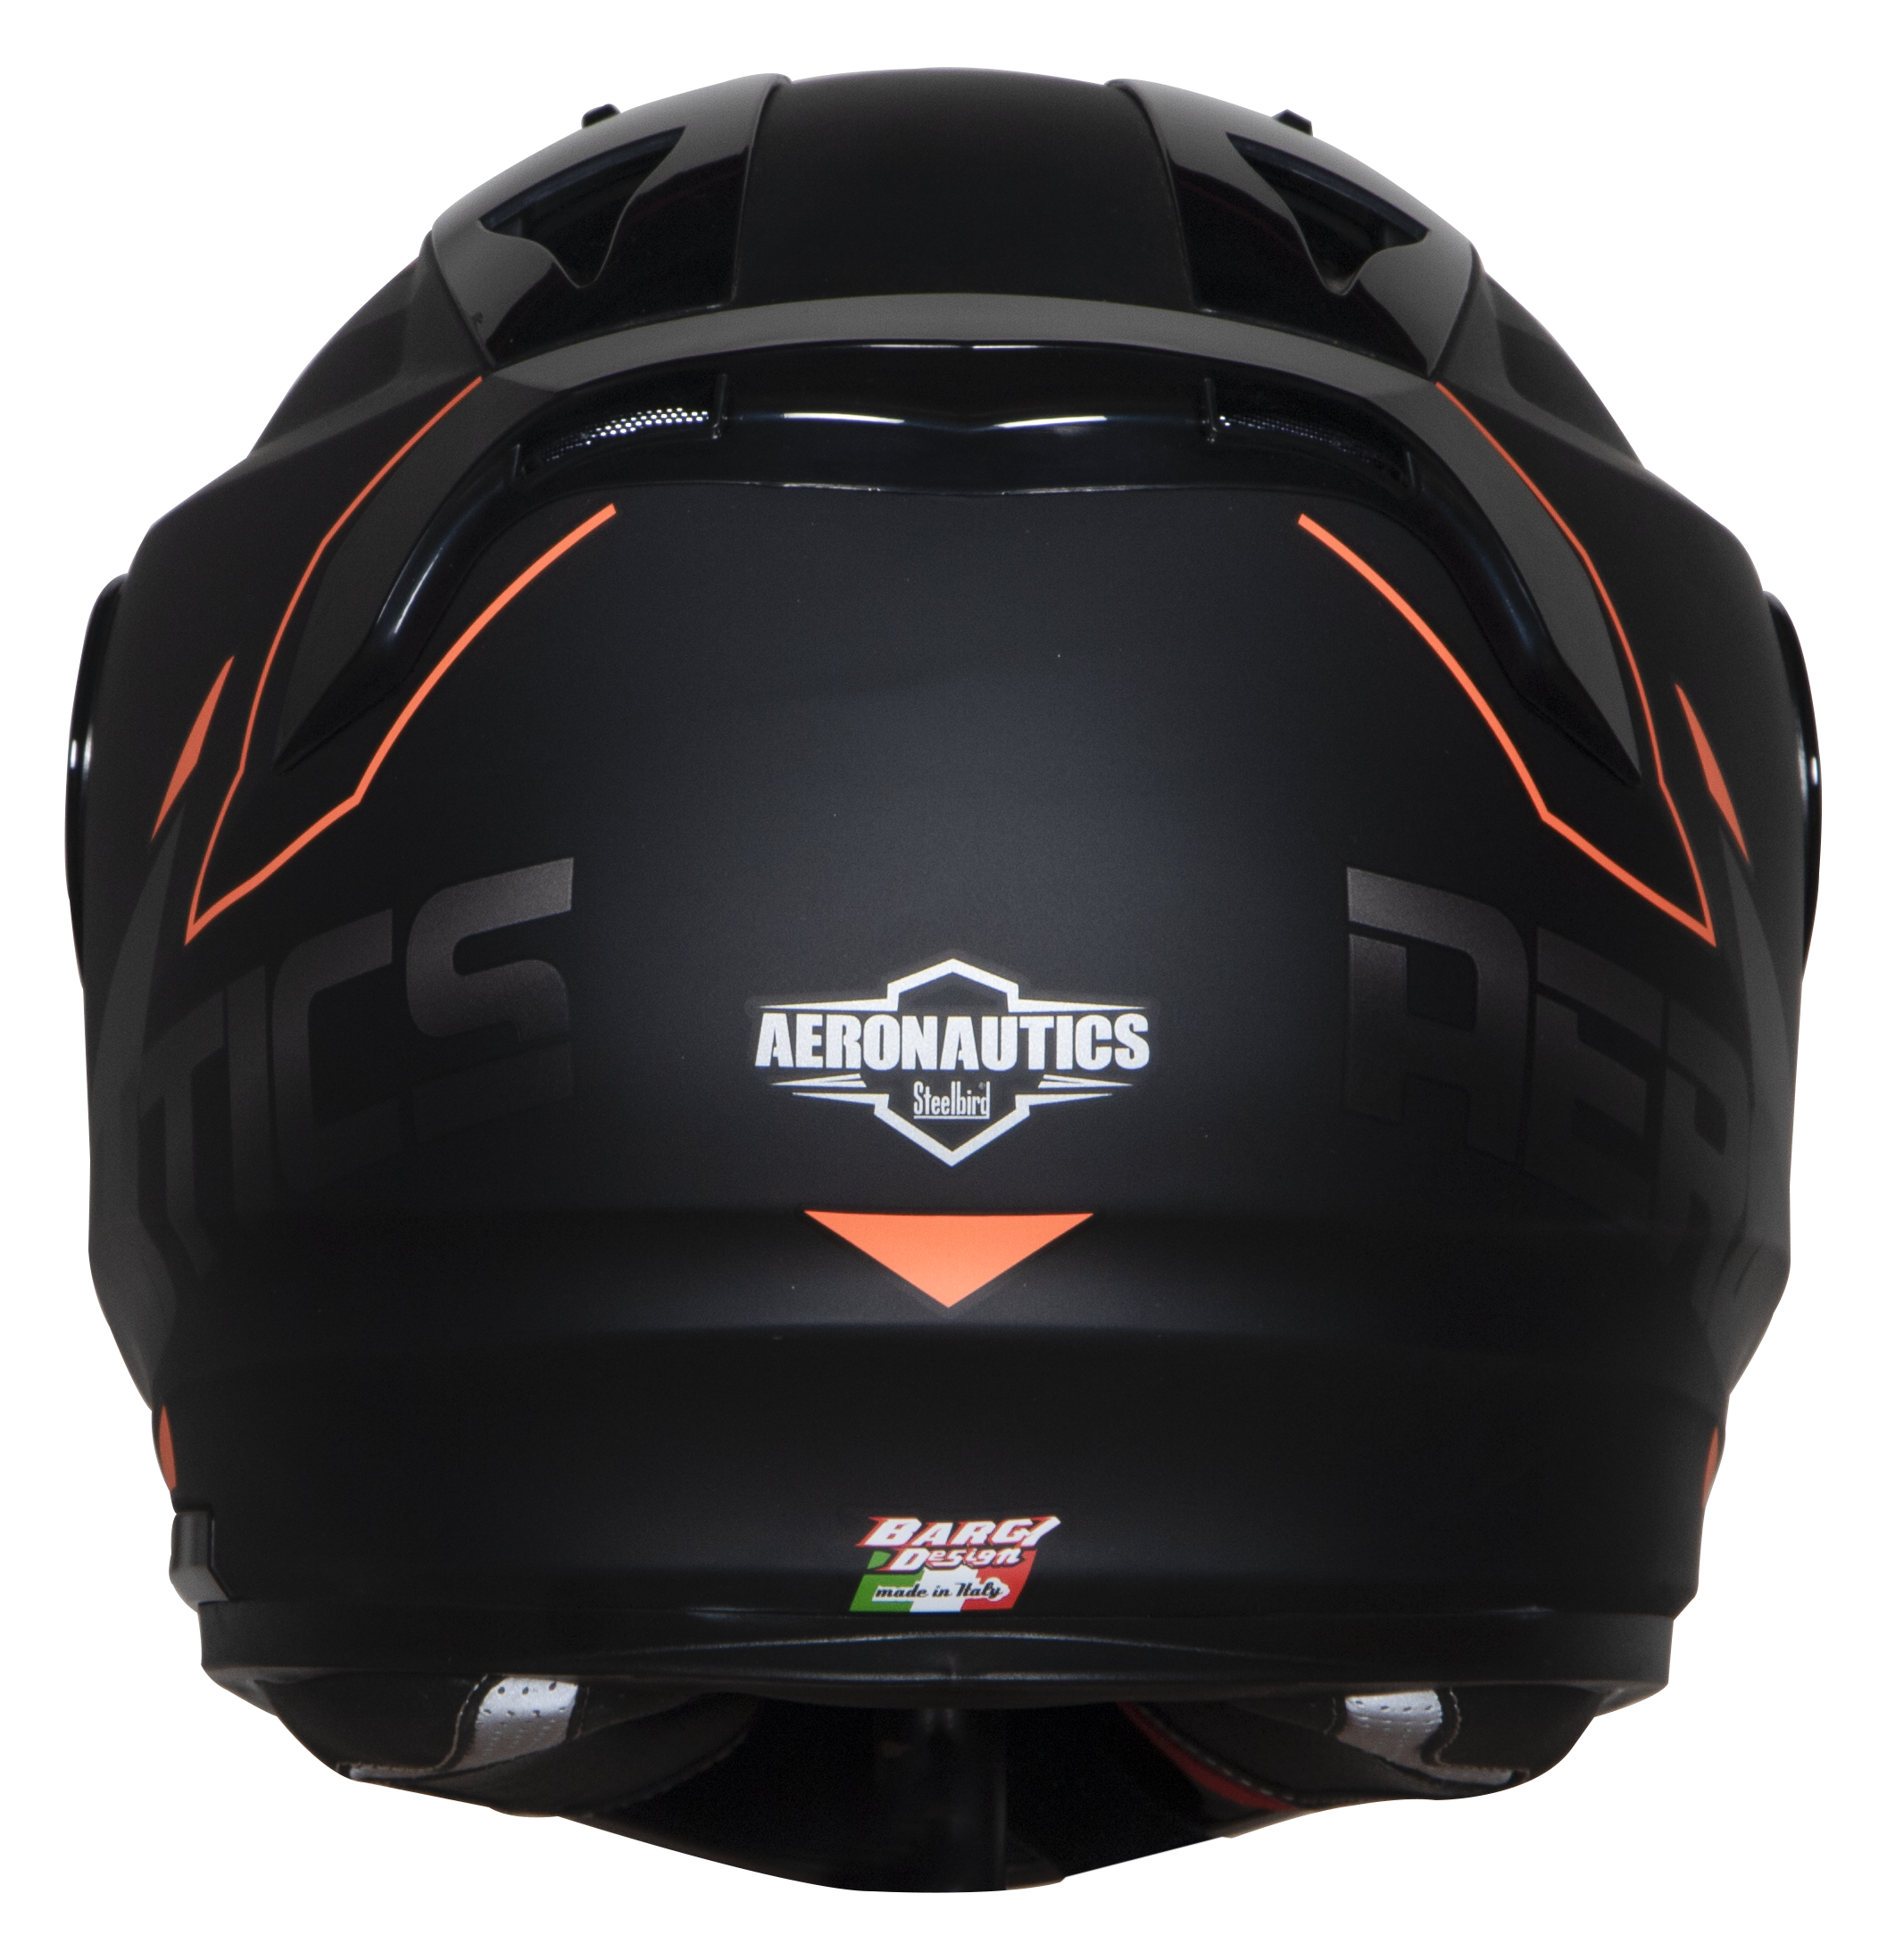 SA-1 RTW Mat Black With Orange (Fitted With Clear Visor Extra Night Vision Blue Visor Free)